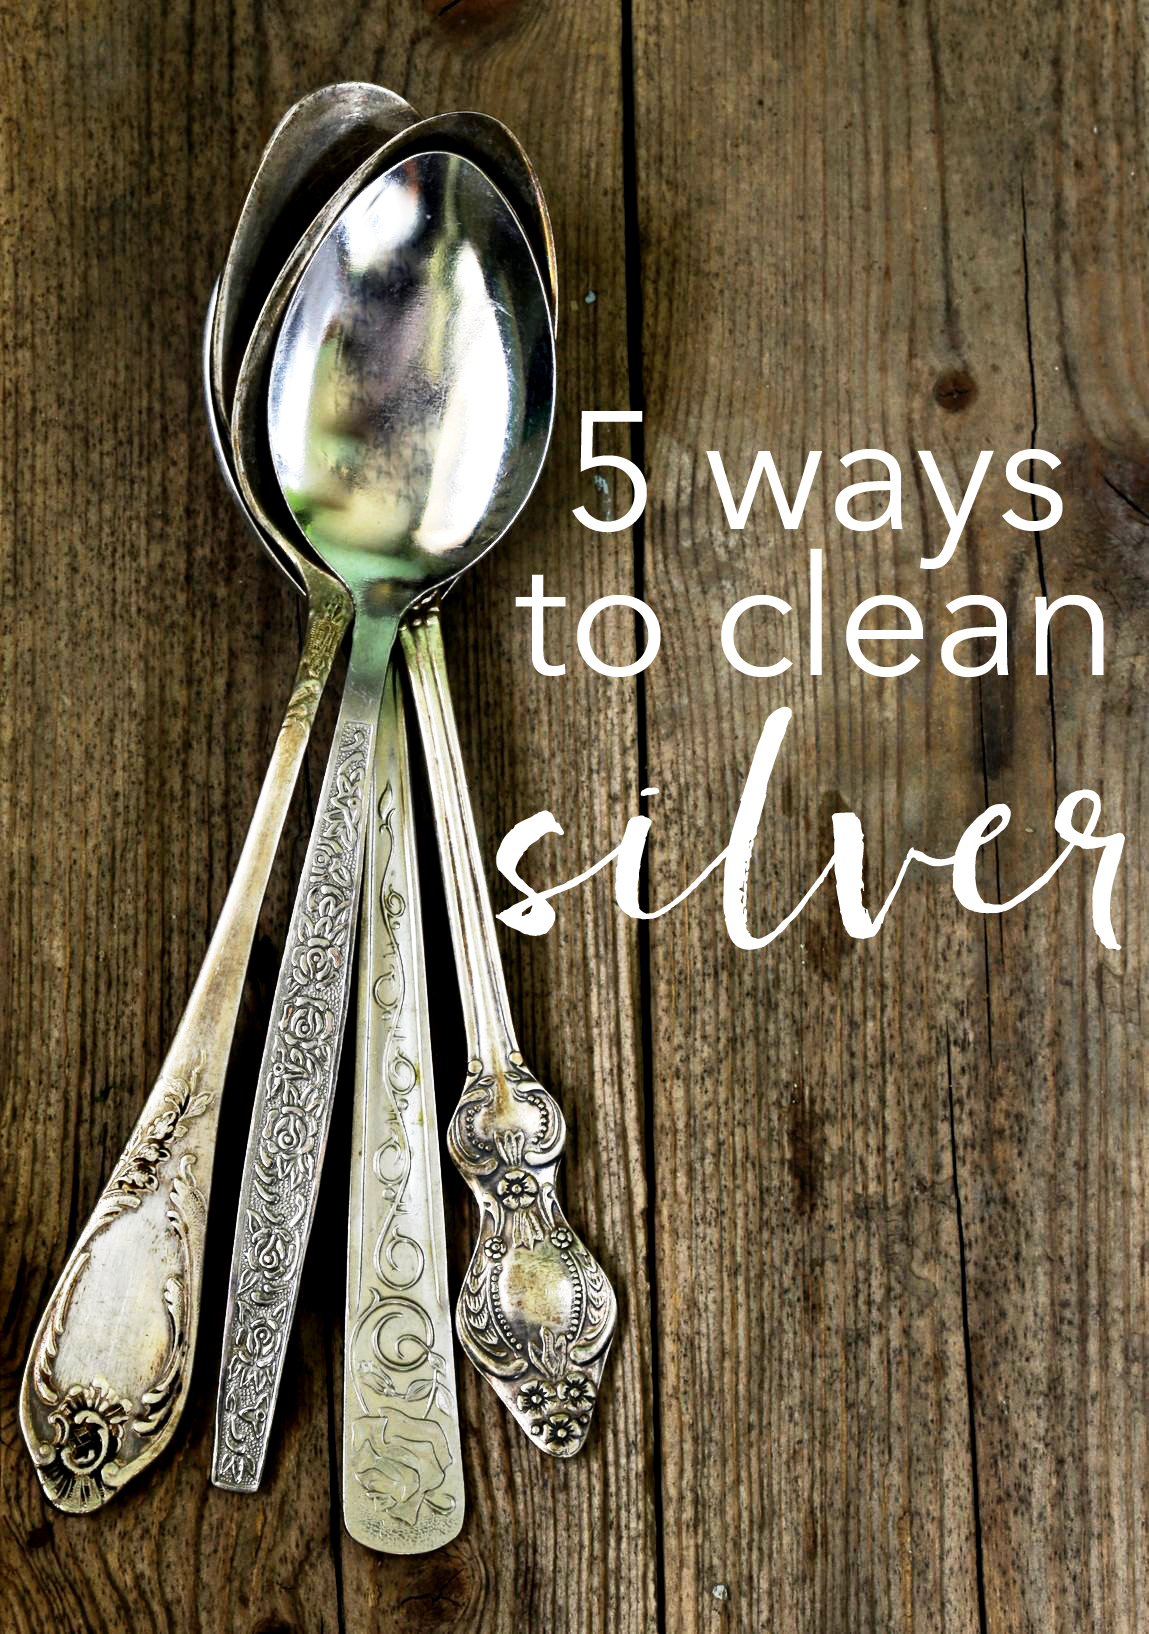 How to clean silver (20 tricks that work with things you have!)